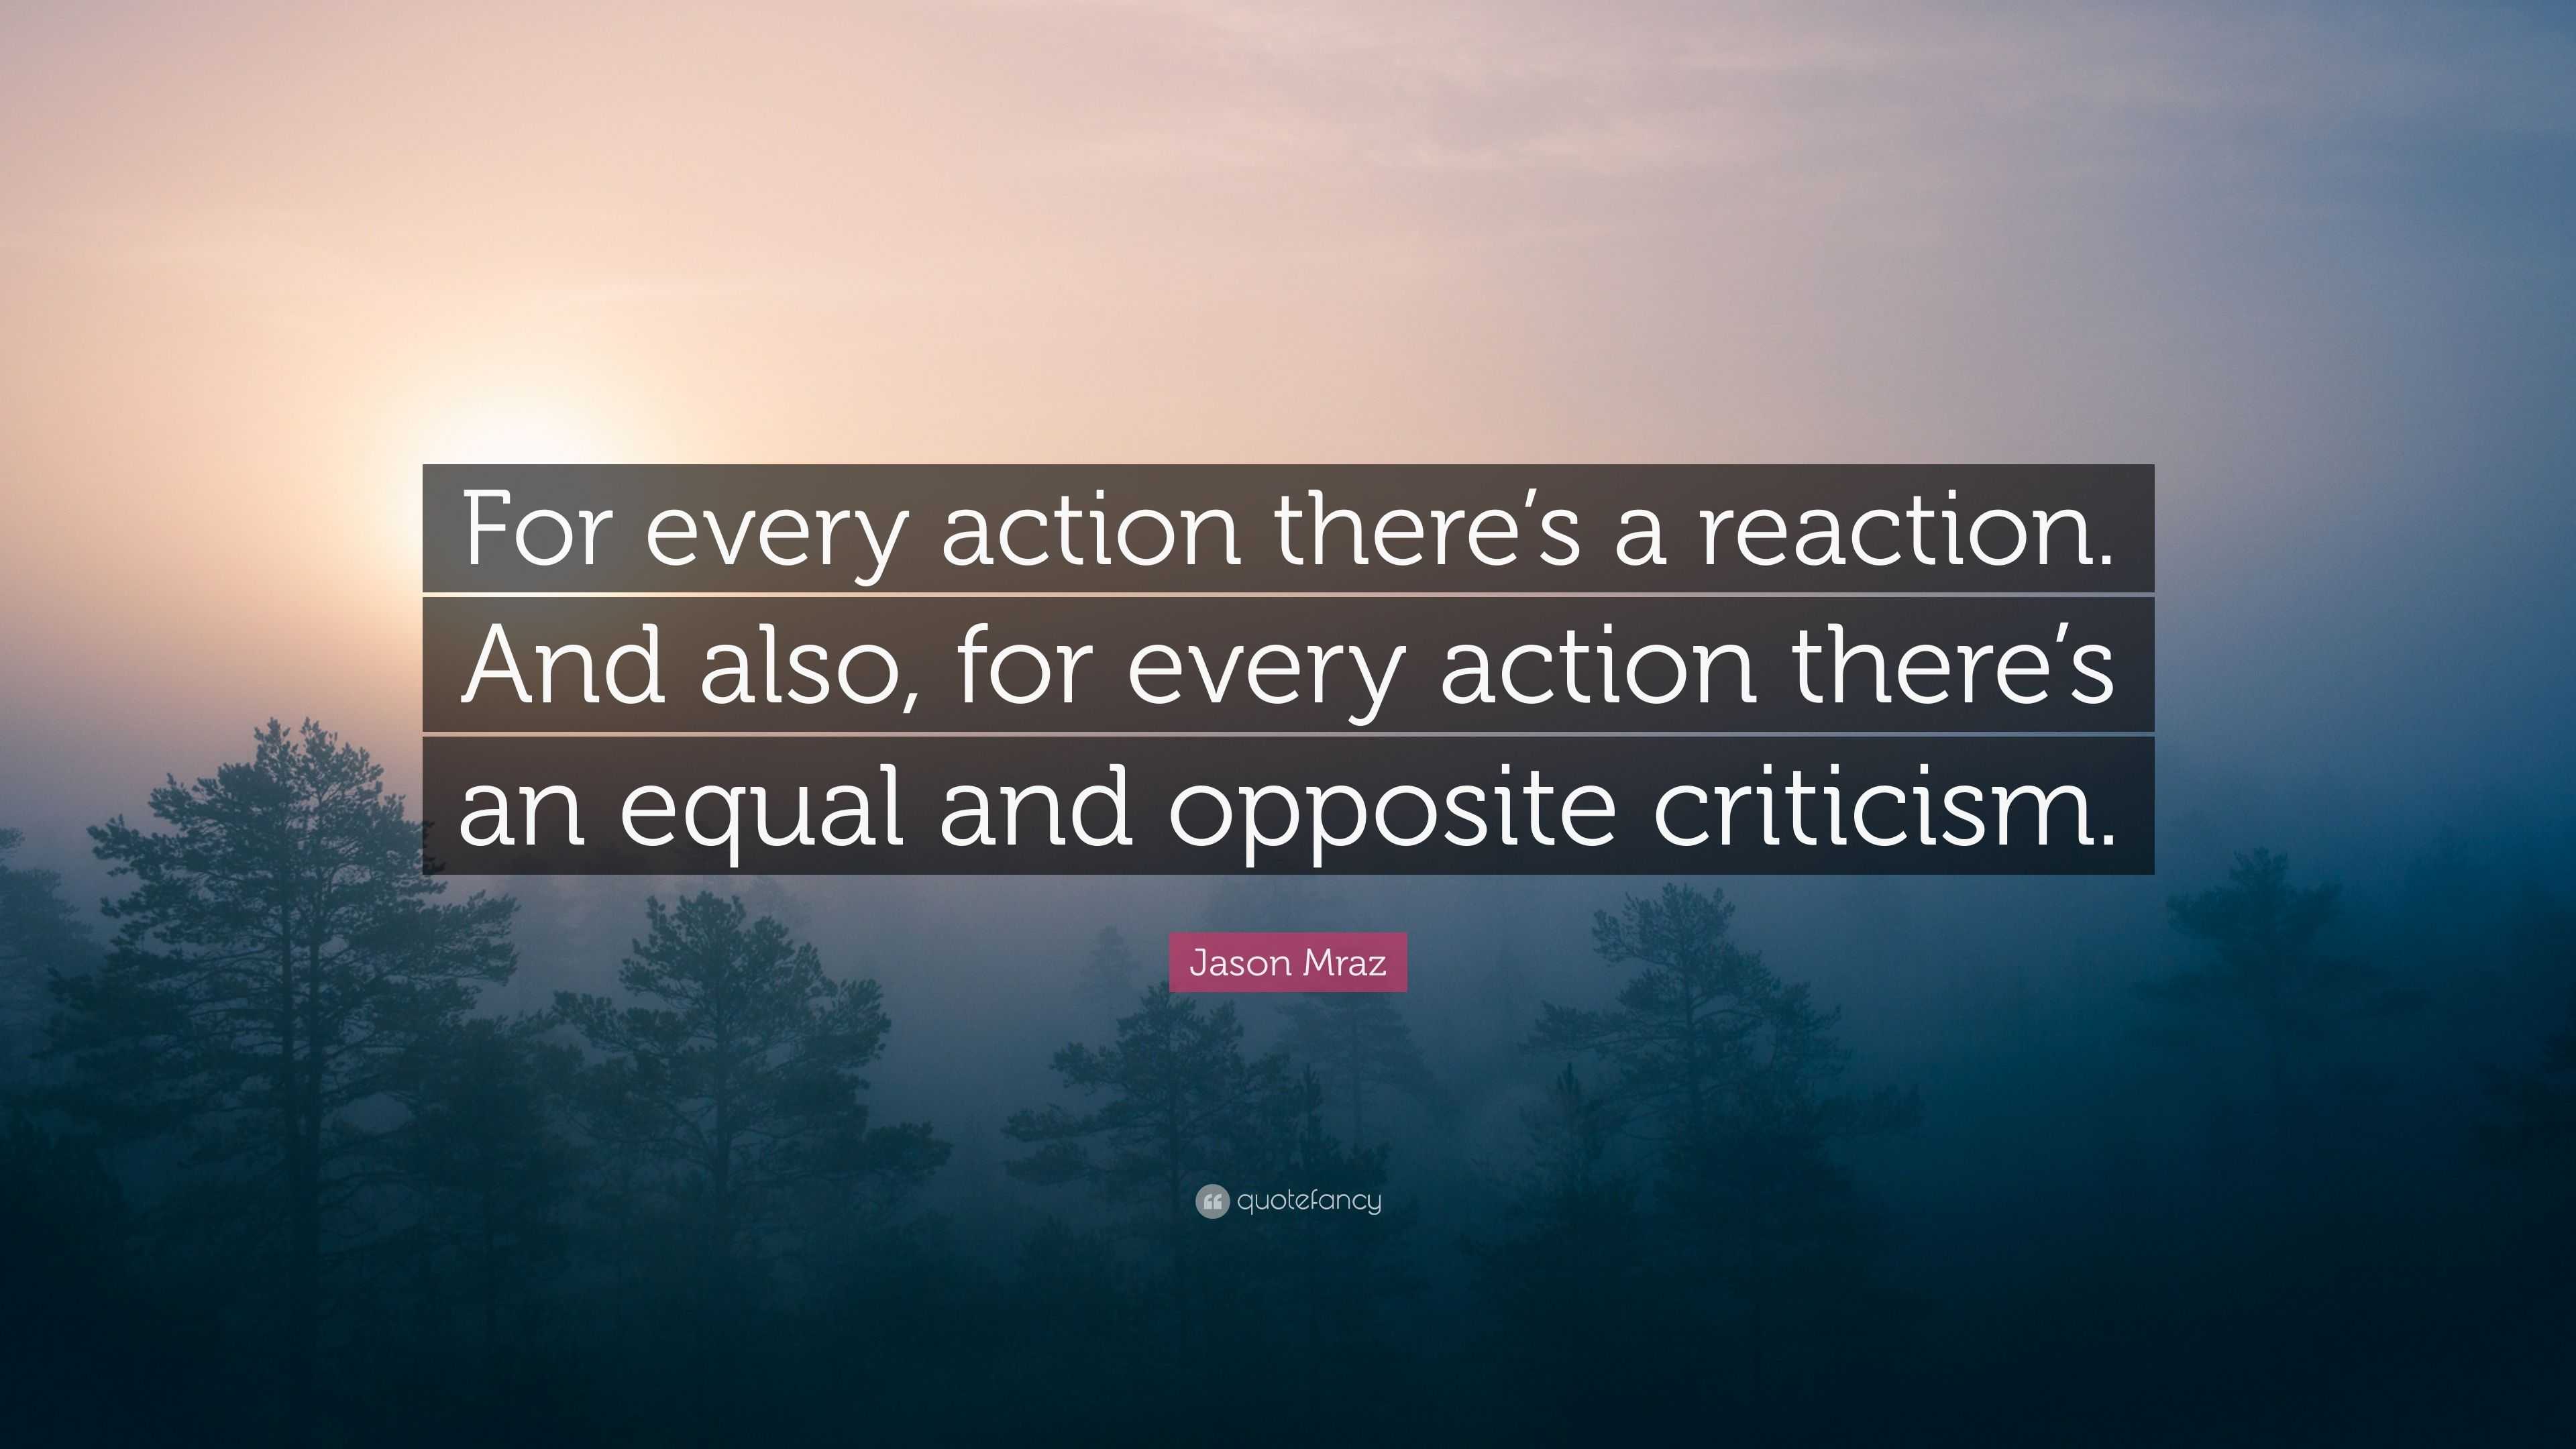 Jason Mraz Quote: "For every action there's a reaction. And also, for every action there's an ...